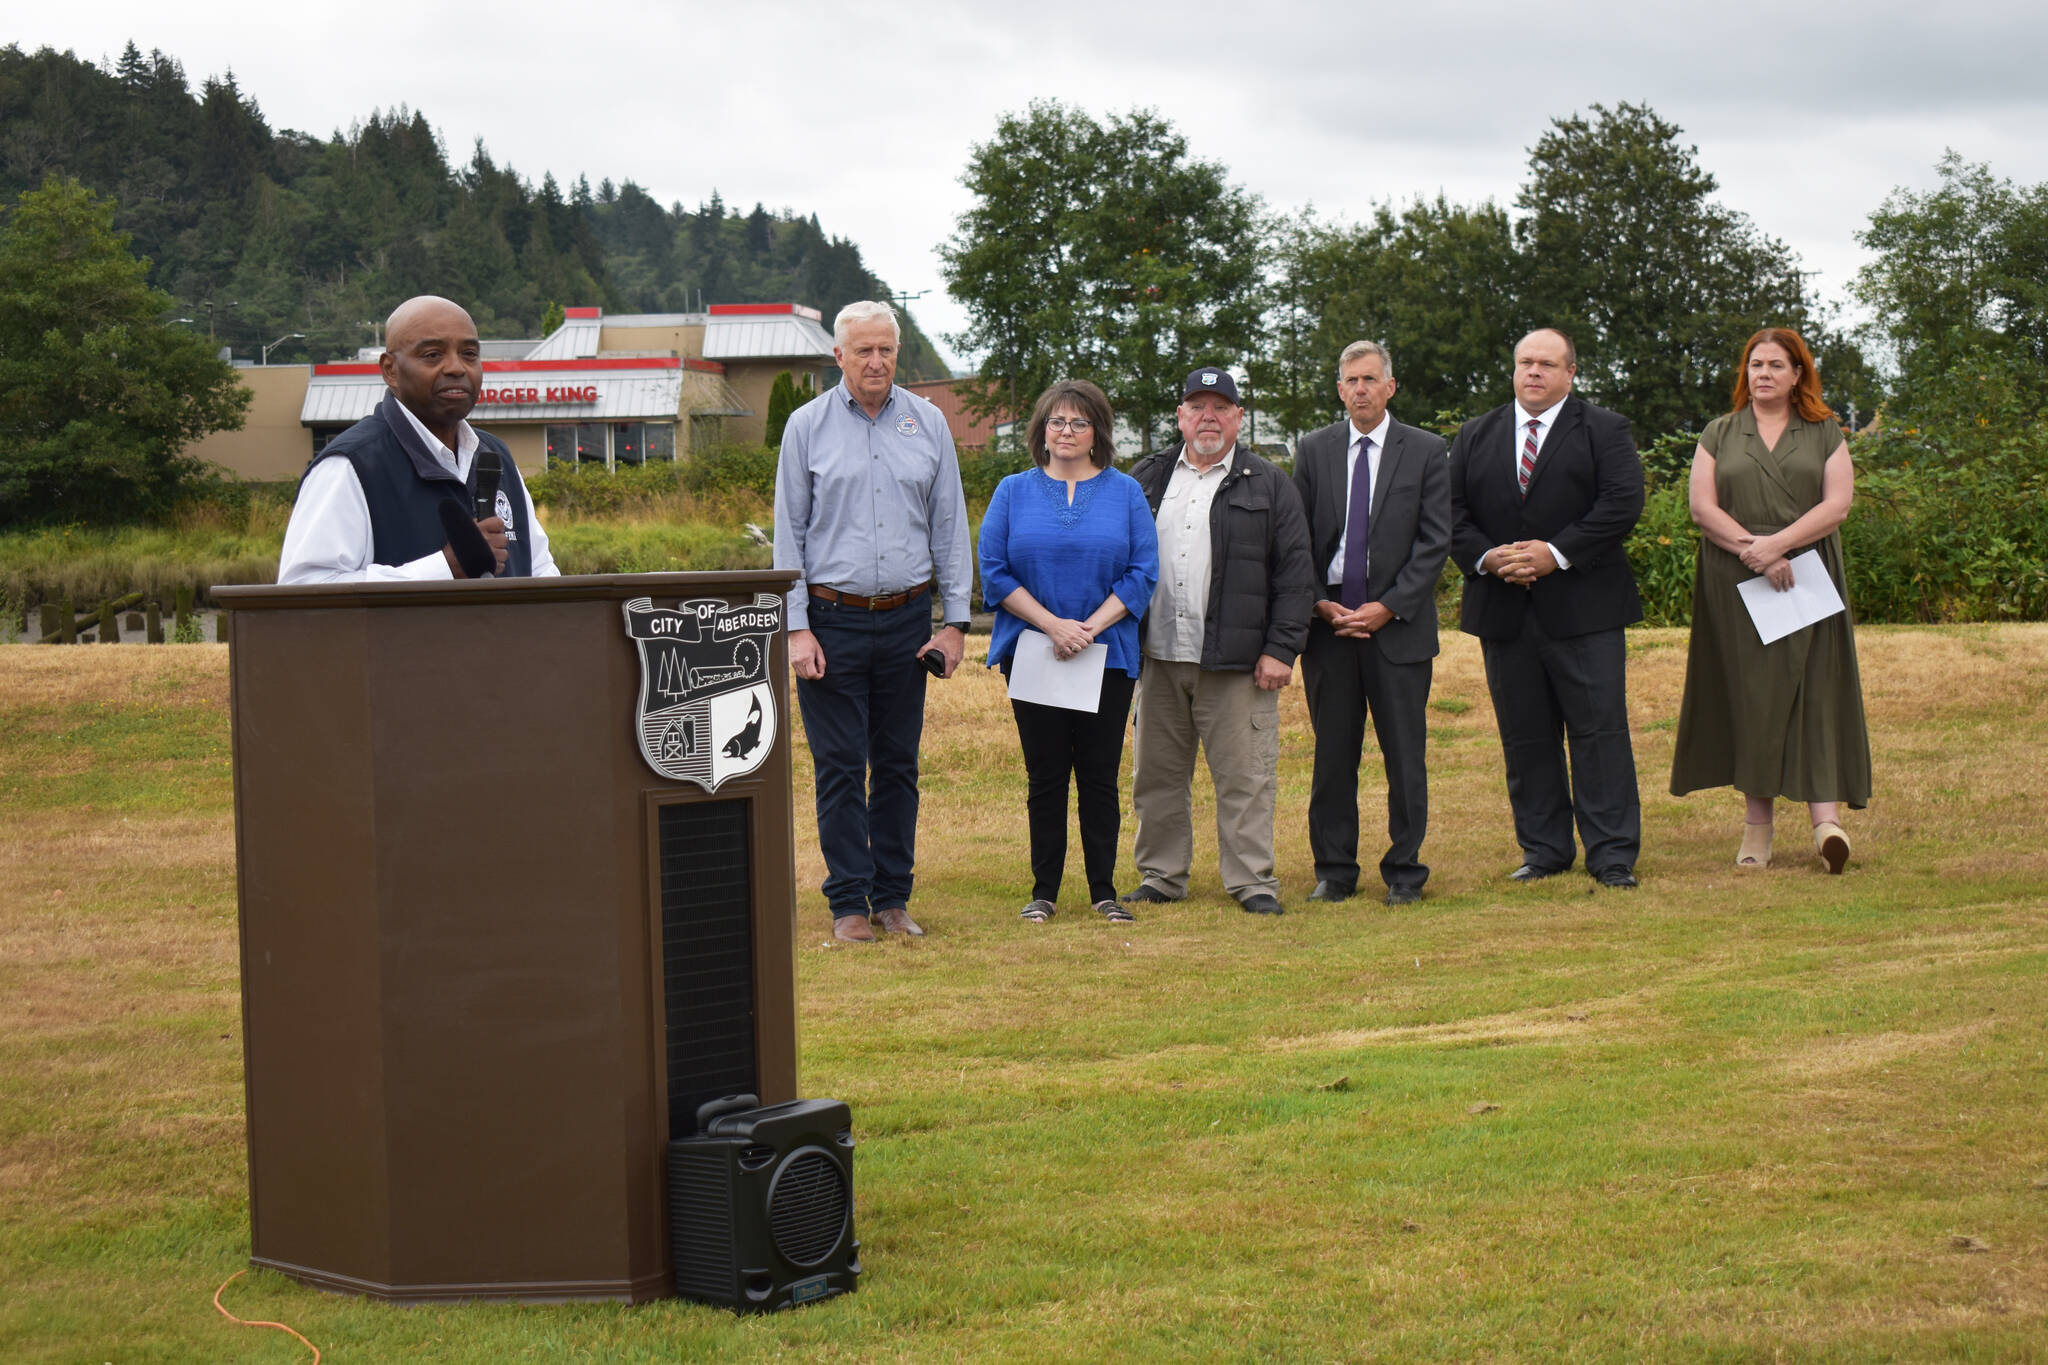 Willie Nunn, director of the Federal Emergency Management Agency’s Region 10, which serves Washington State, Alaska, Oregon, and Idaho, speaks about the significance in the city of Aberdeen receiving $50 million in Building Resilient Infrastructure and Communities grant funding for the North Shore Levee Project, as local and state officials stand behind him. (Matthew N. Wells | The Daily World)